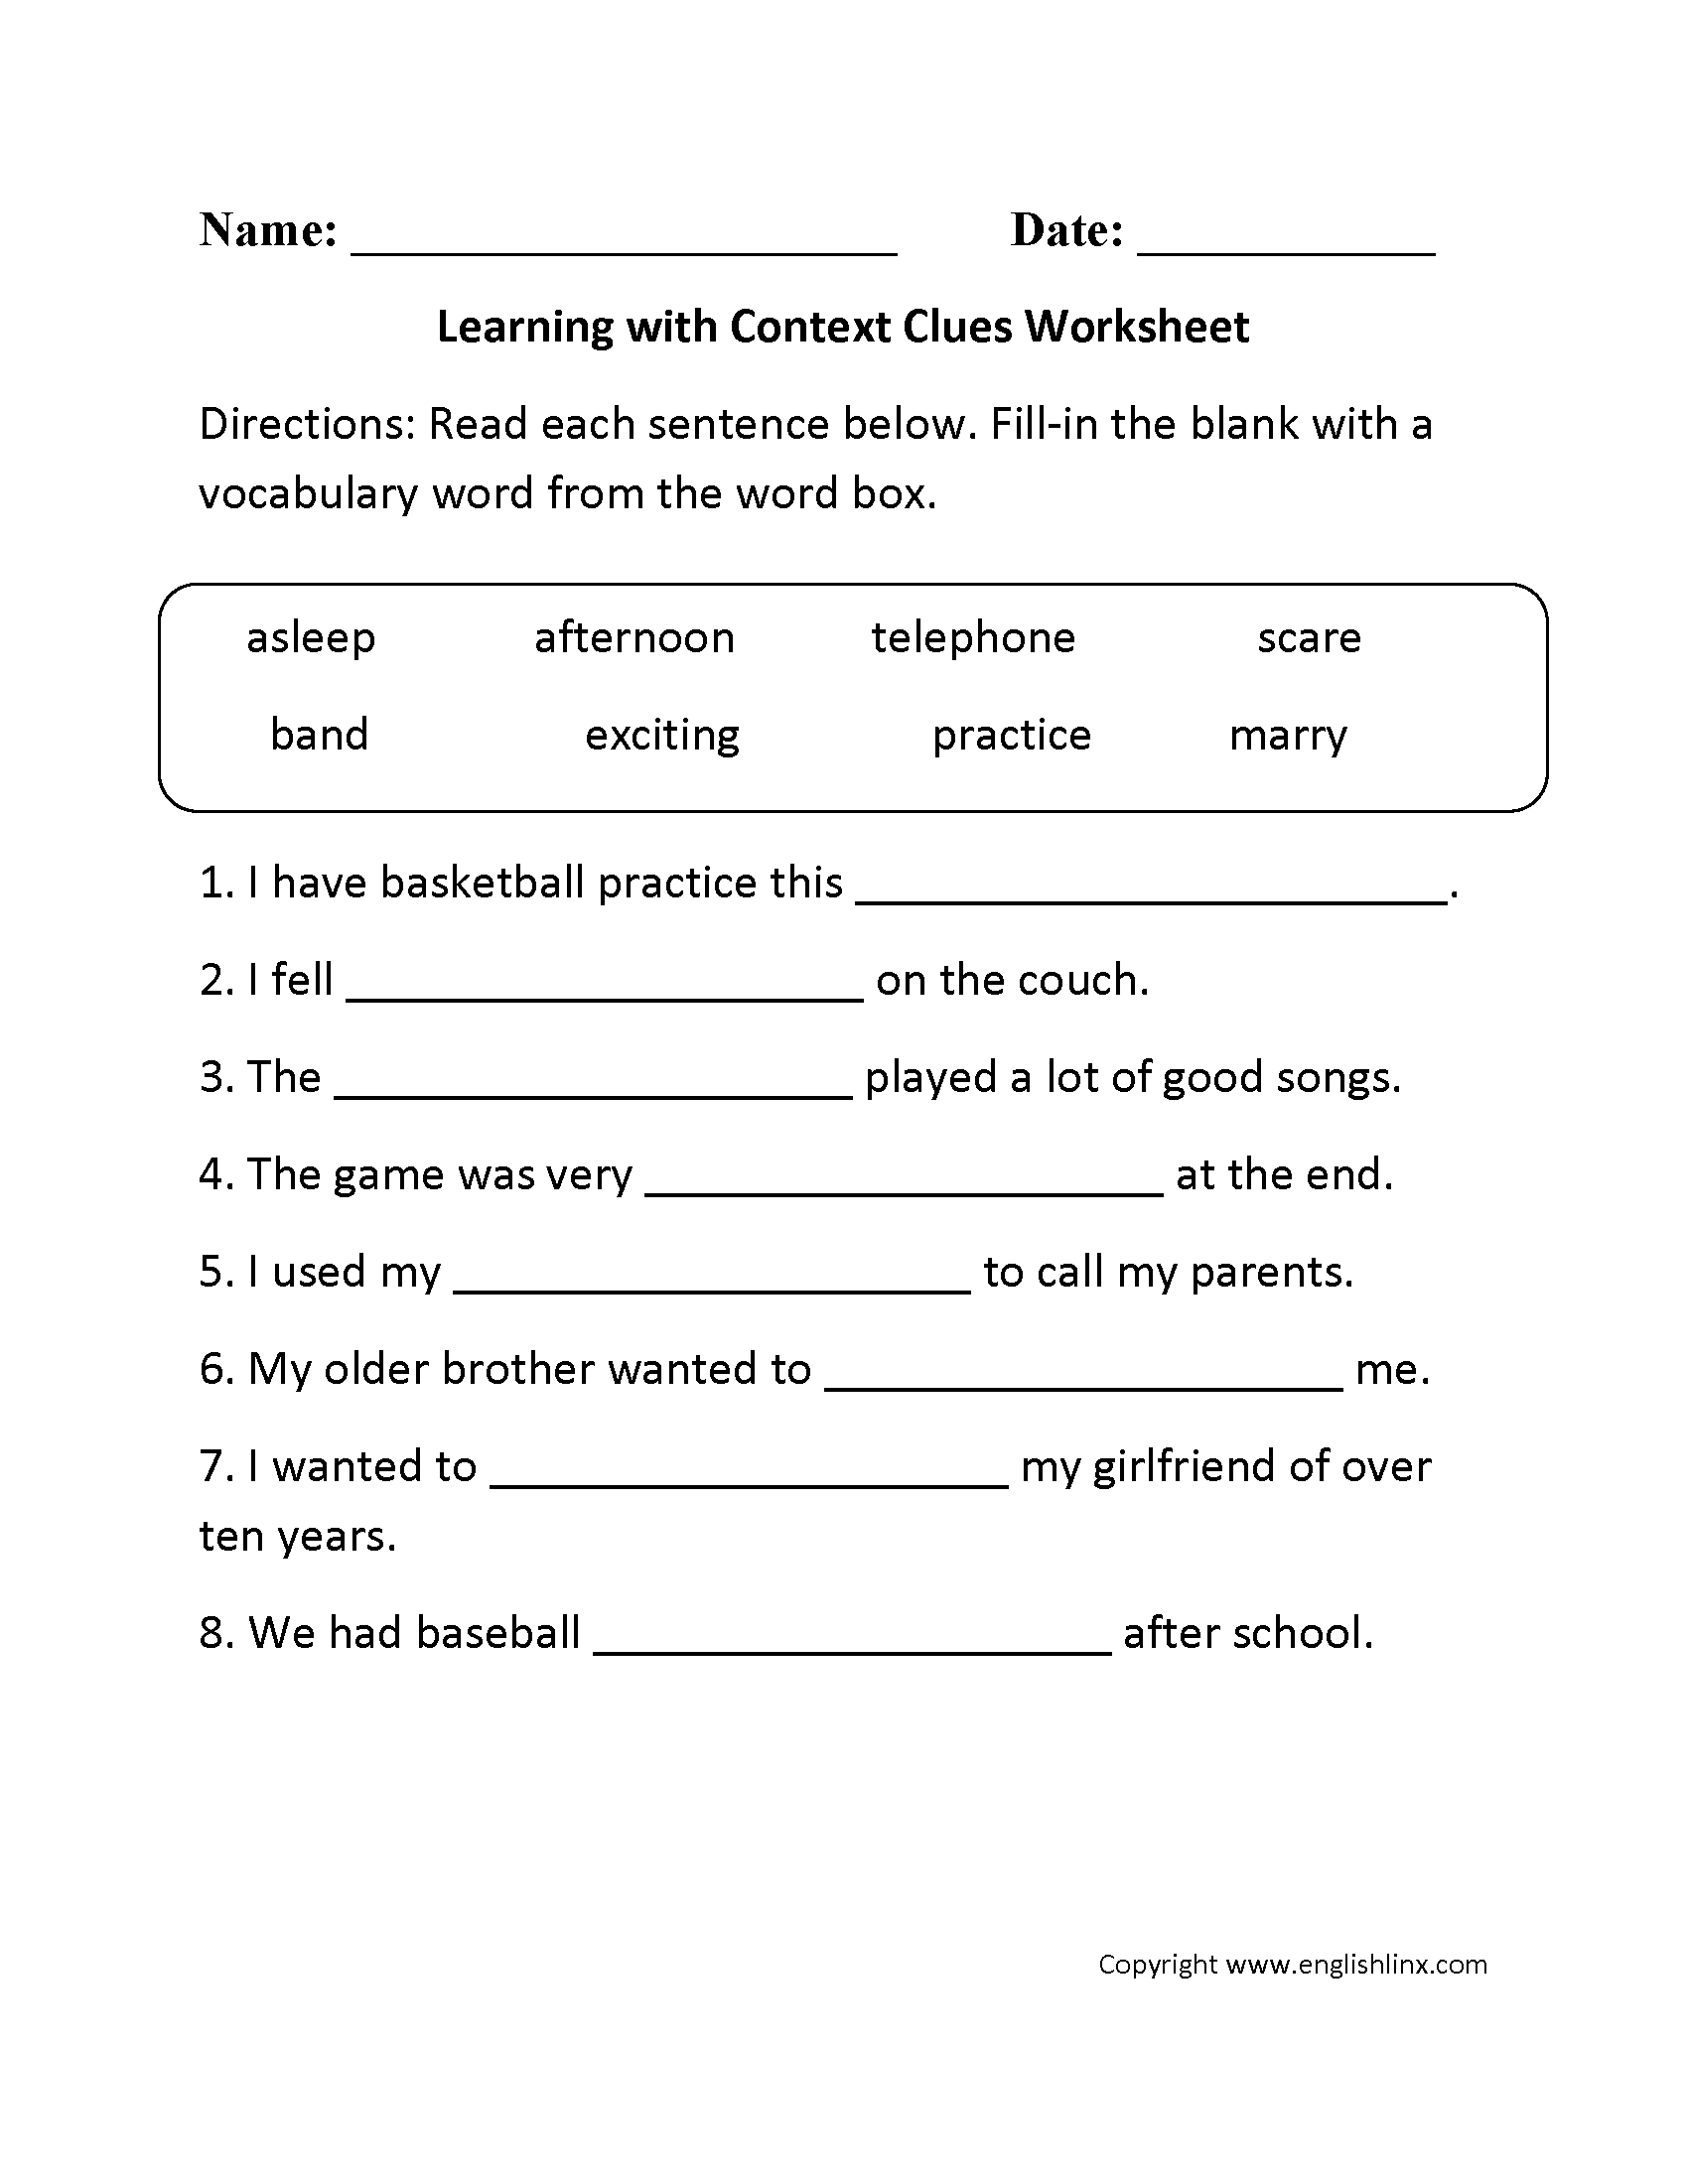 Context Clues Worksheets Multiple Choice With Answers Pdf